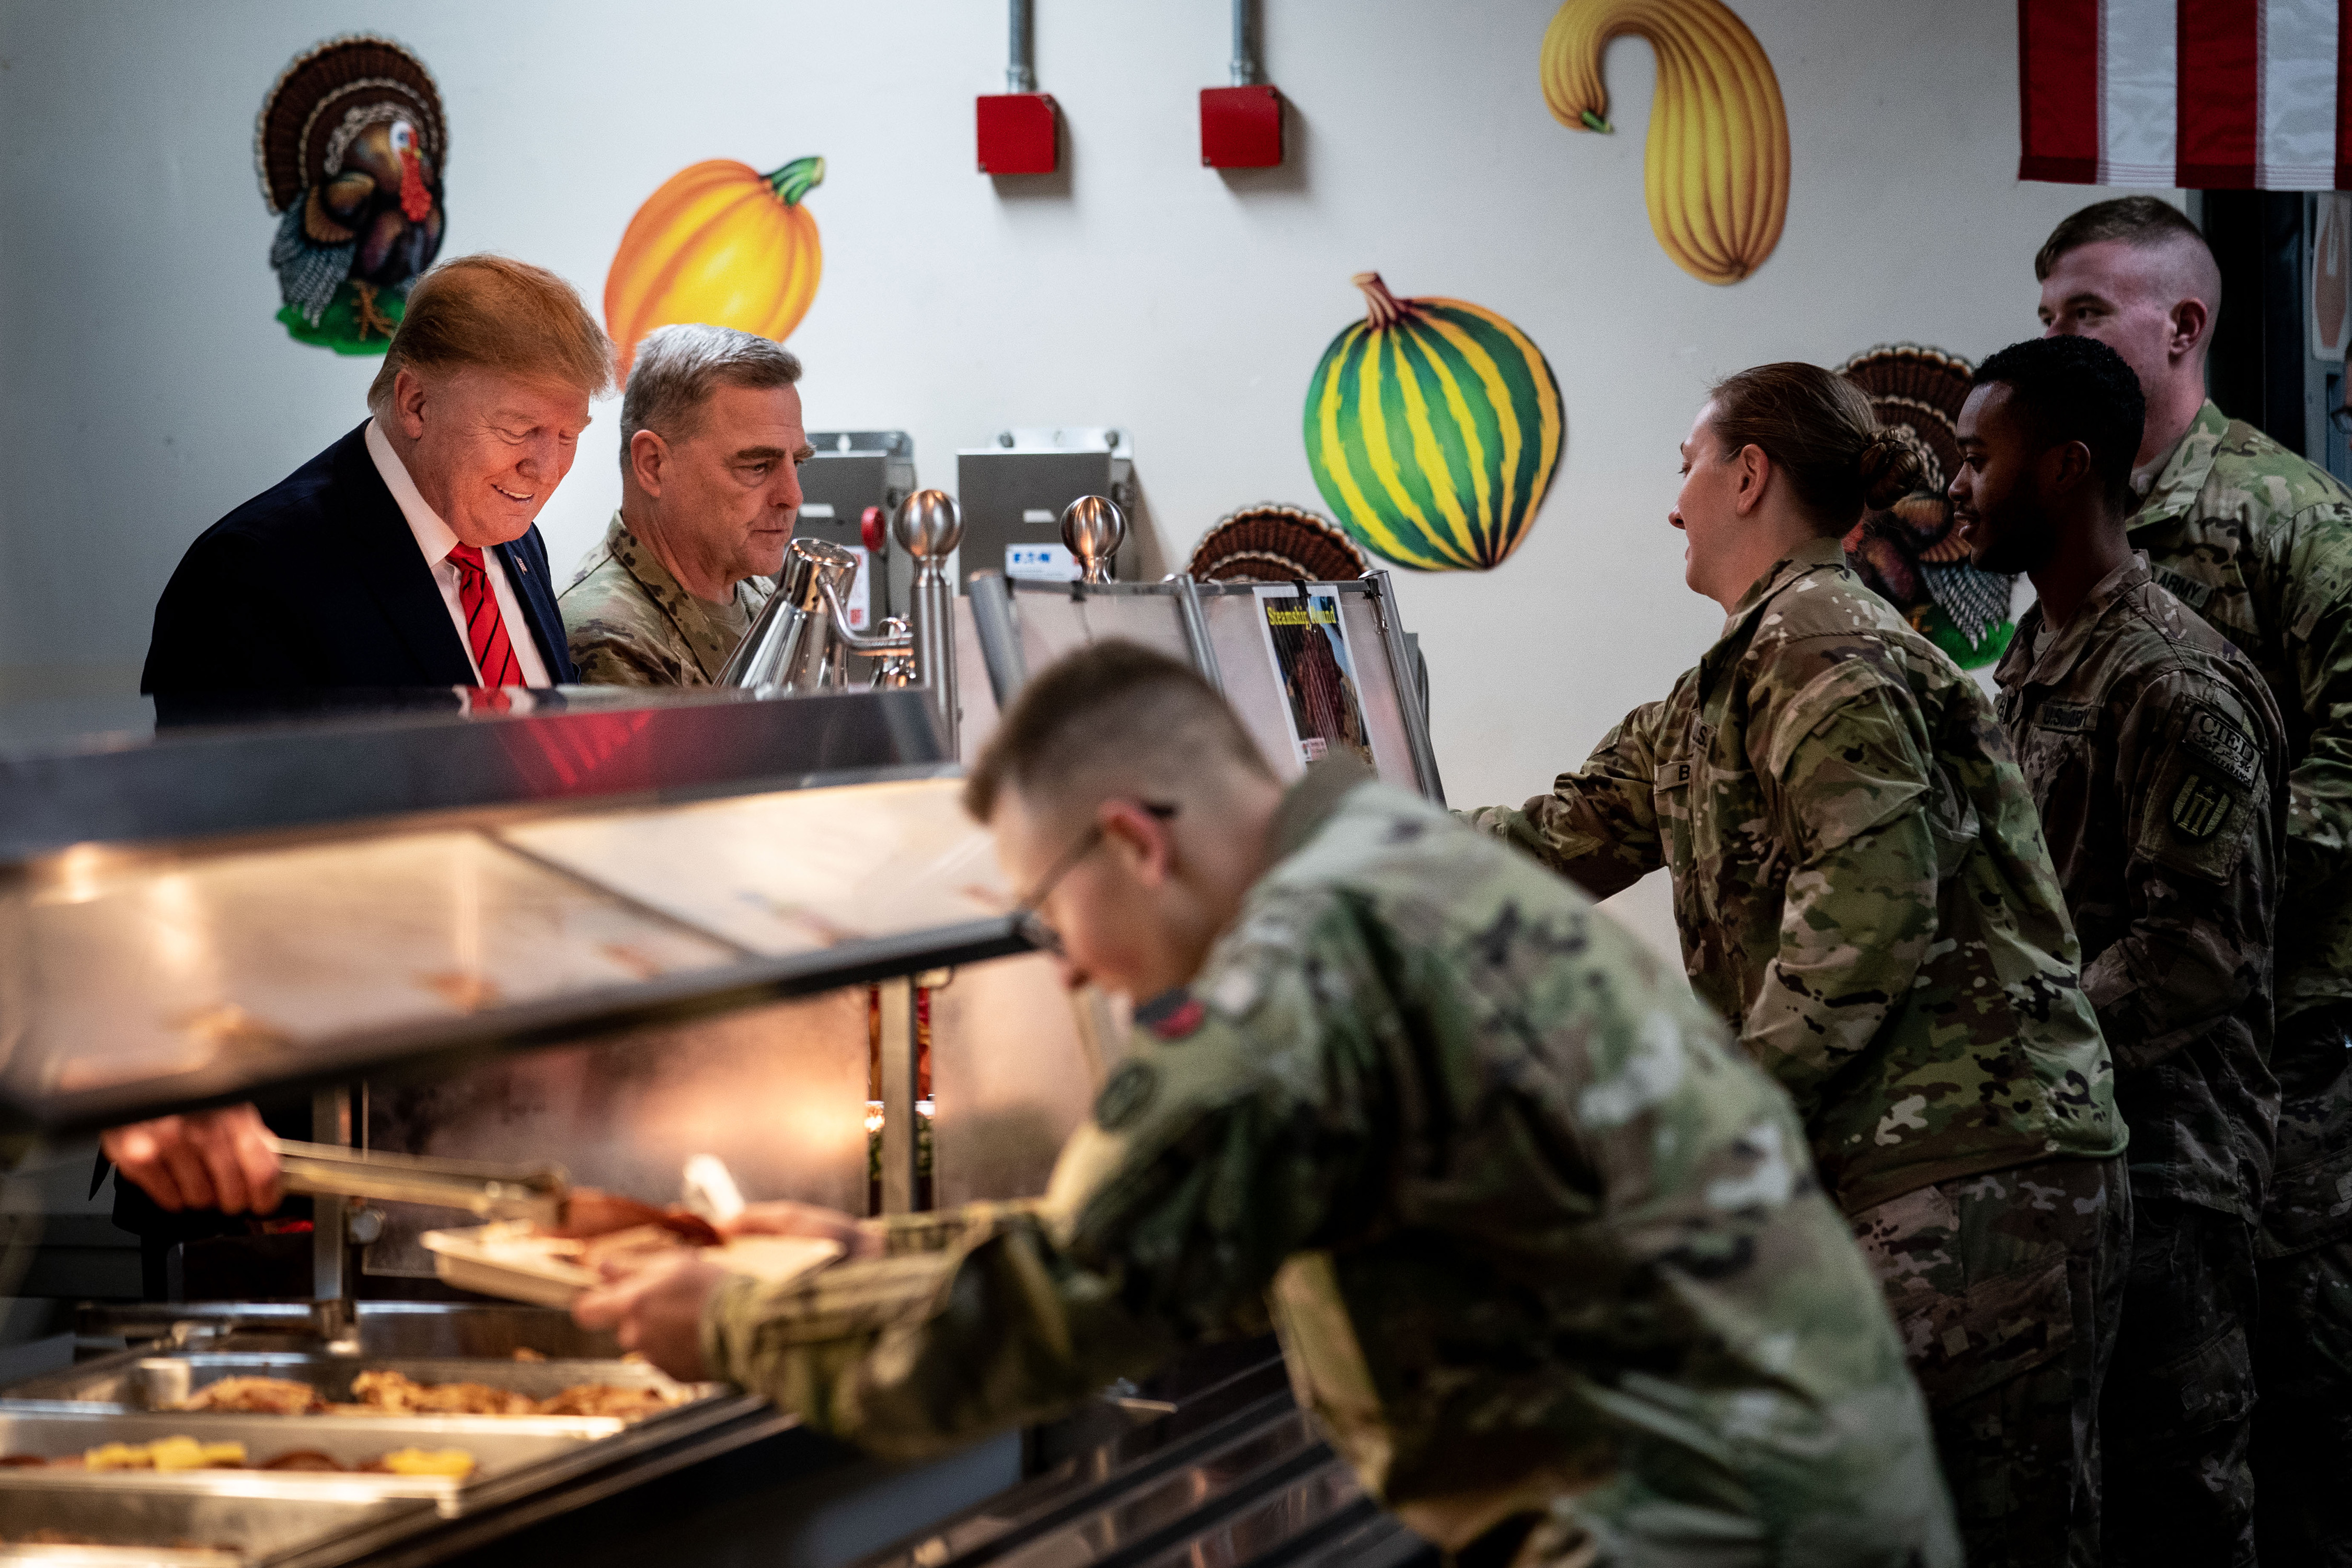 US President Donald Trump serves food to troops during a Thanksgiving visit to Bagram Air Field in Bagram district, Afghanistan on Thursday, November 28, 2019.